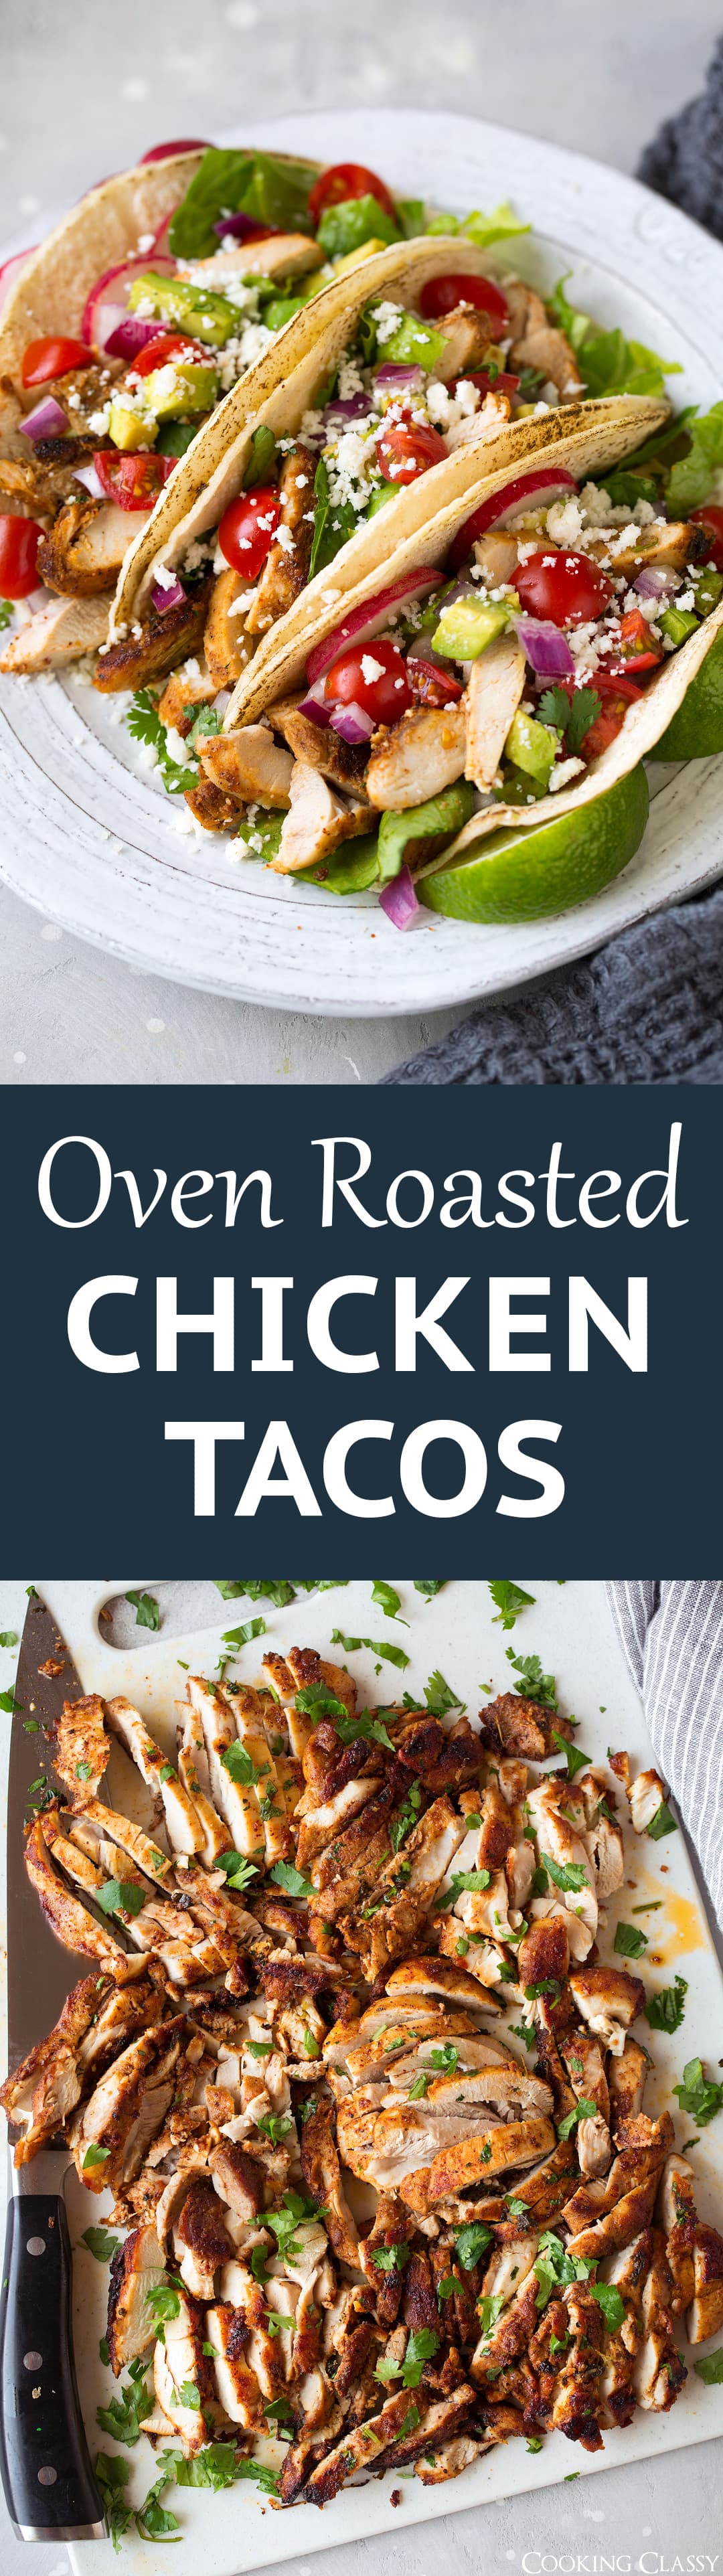 Oven Roasted Chicken Tacos - Cooking Classy